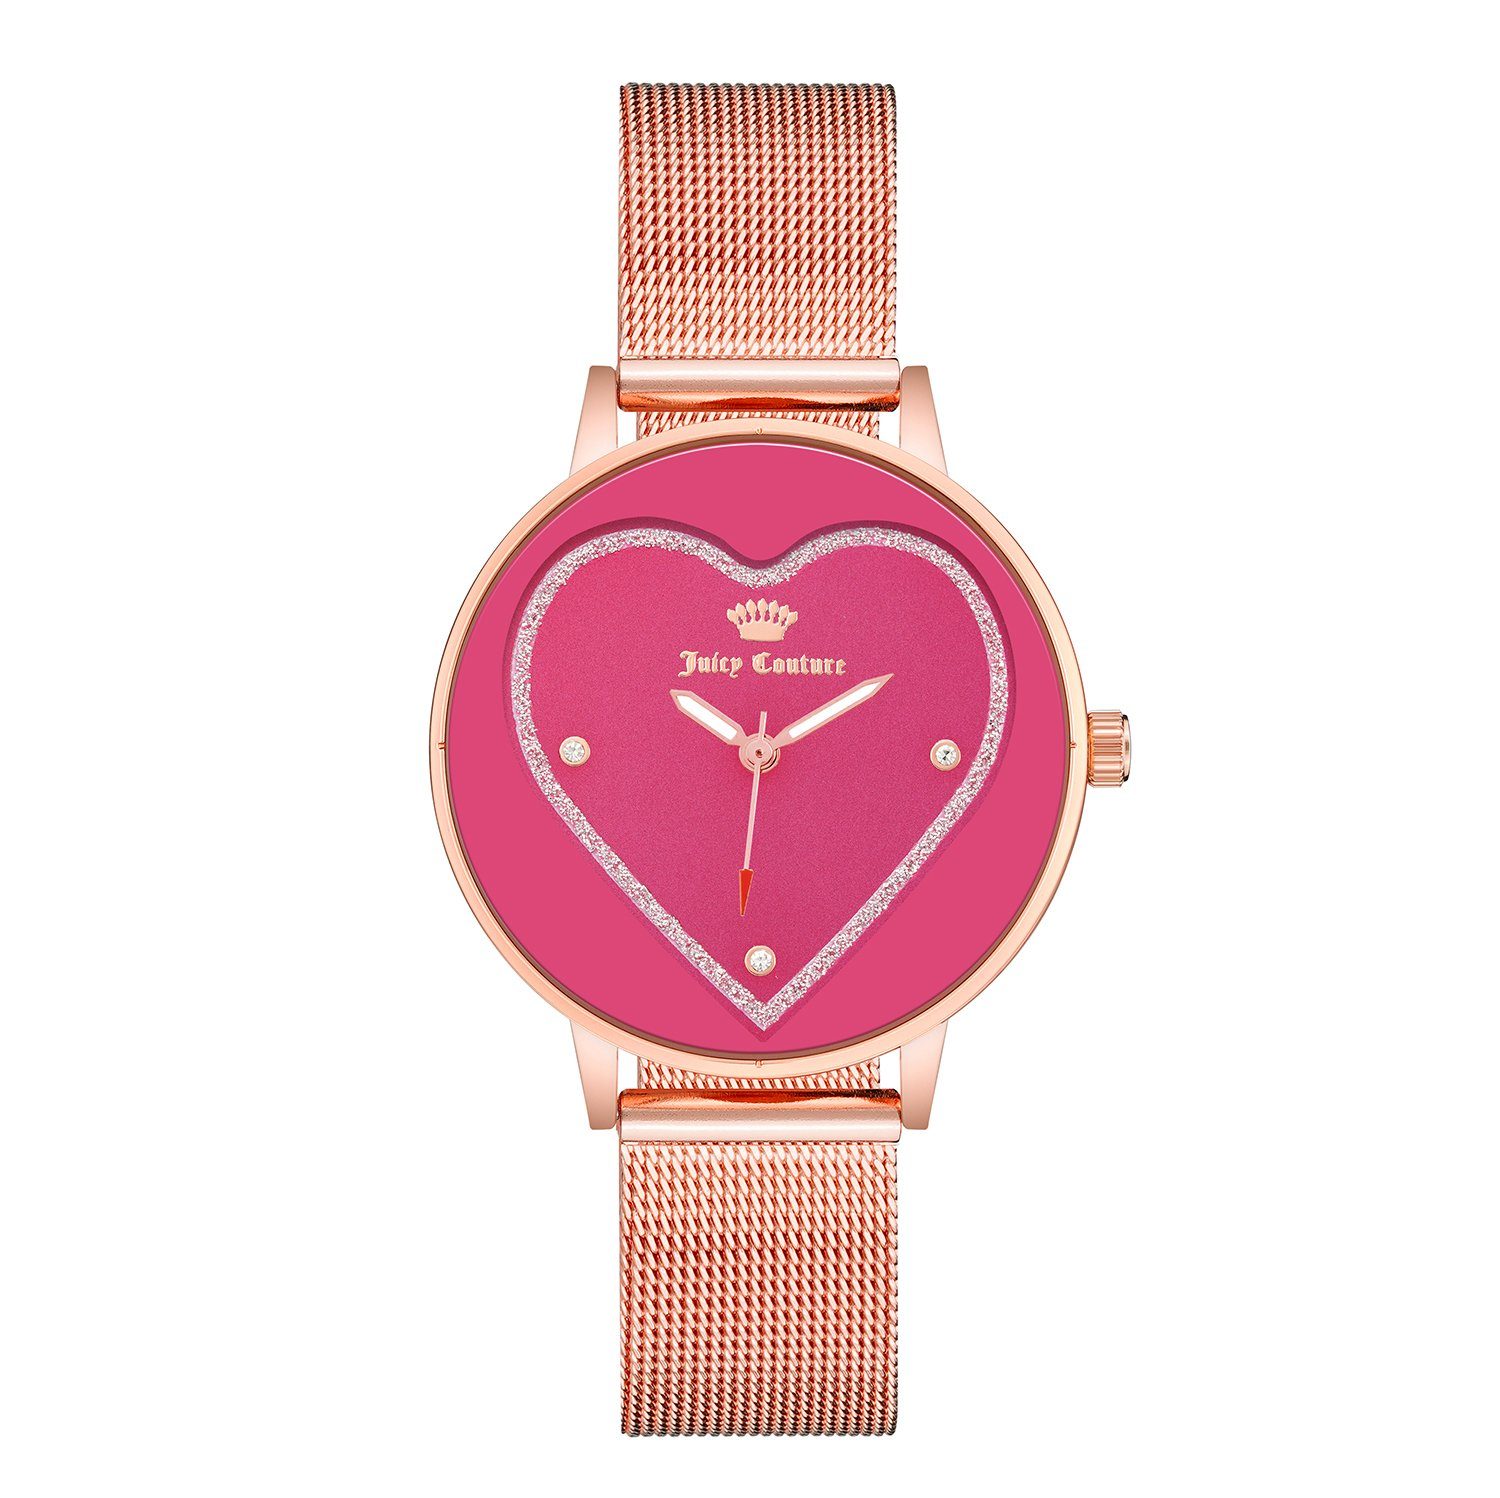 Juicy Couture Digitaluhr JC/1240HPRG